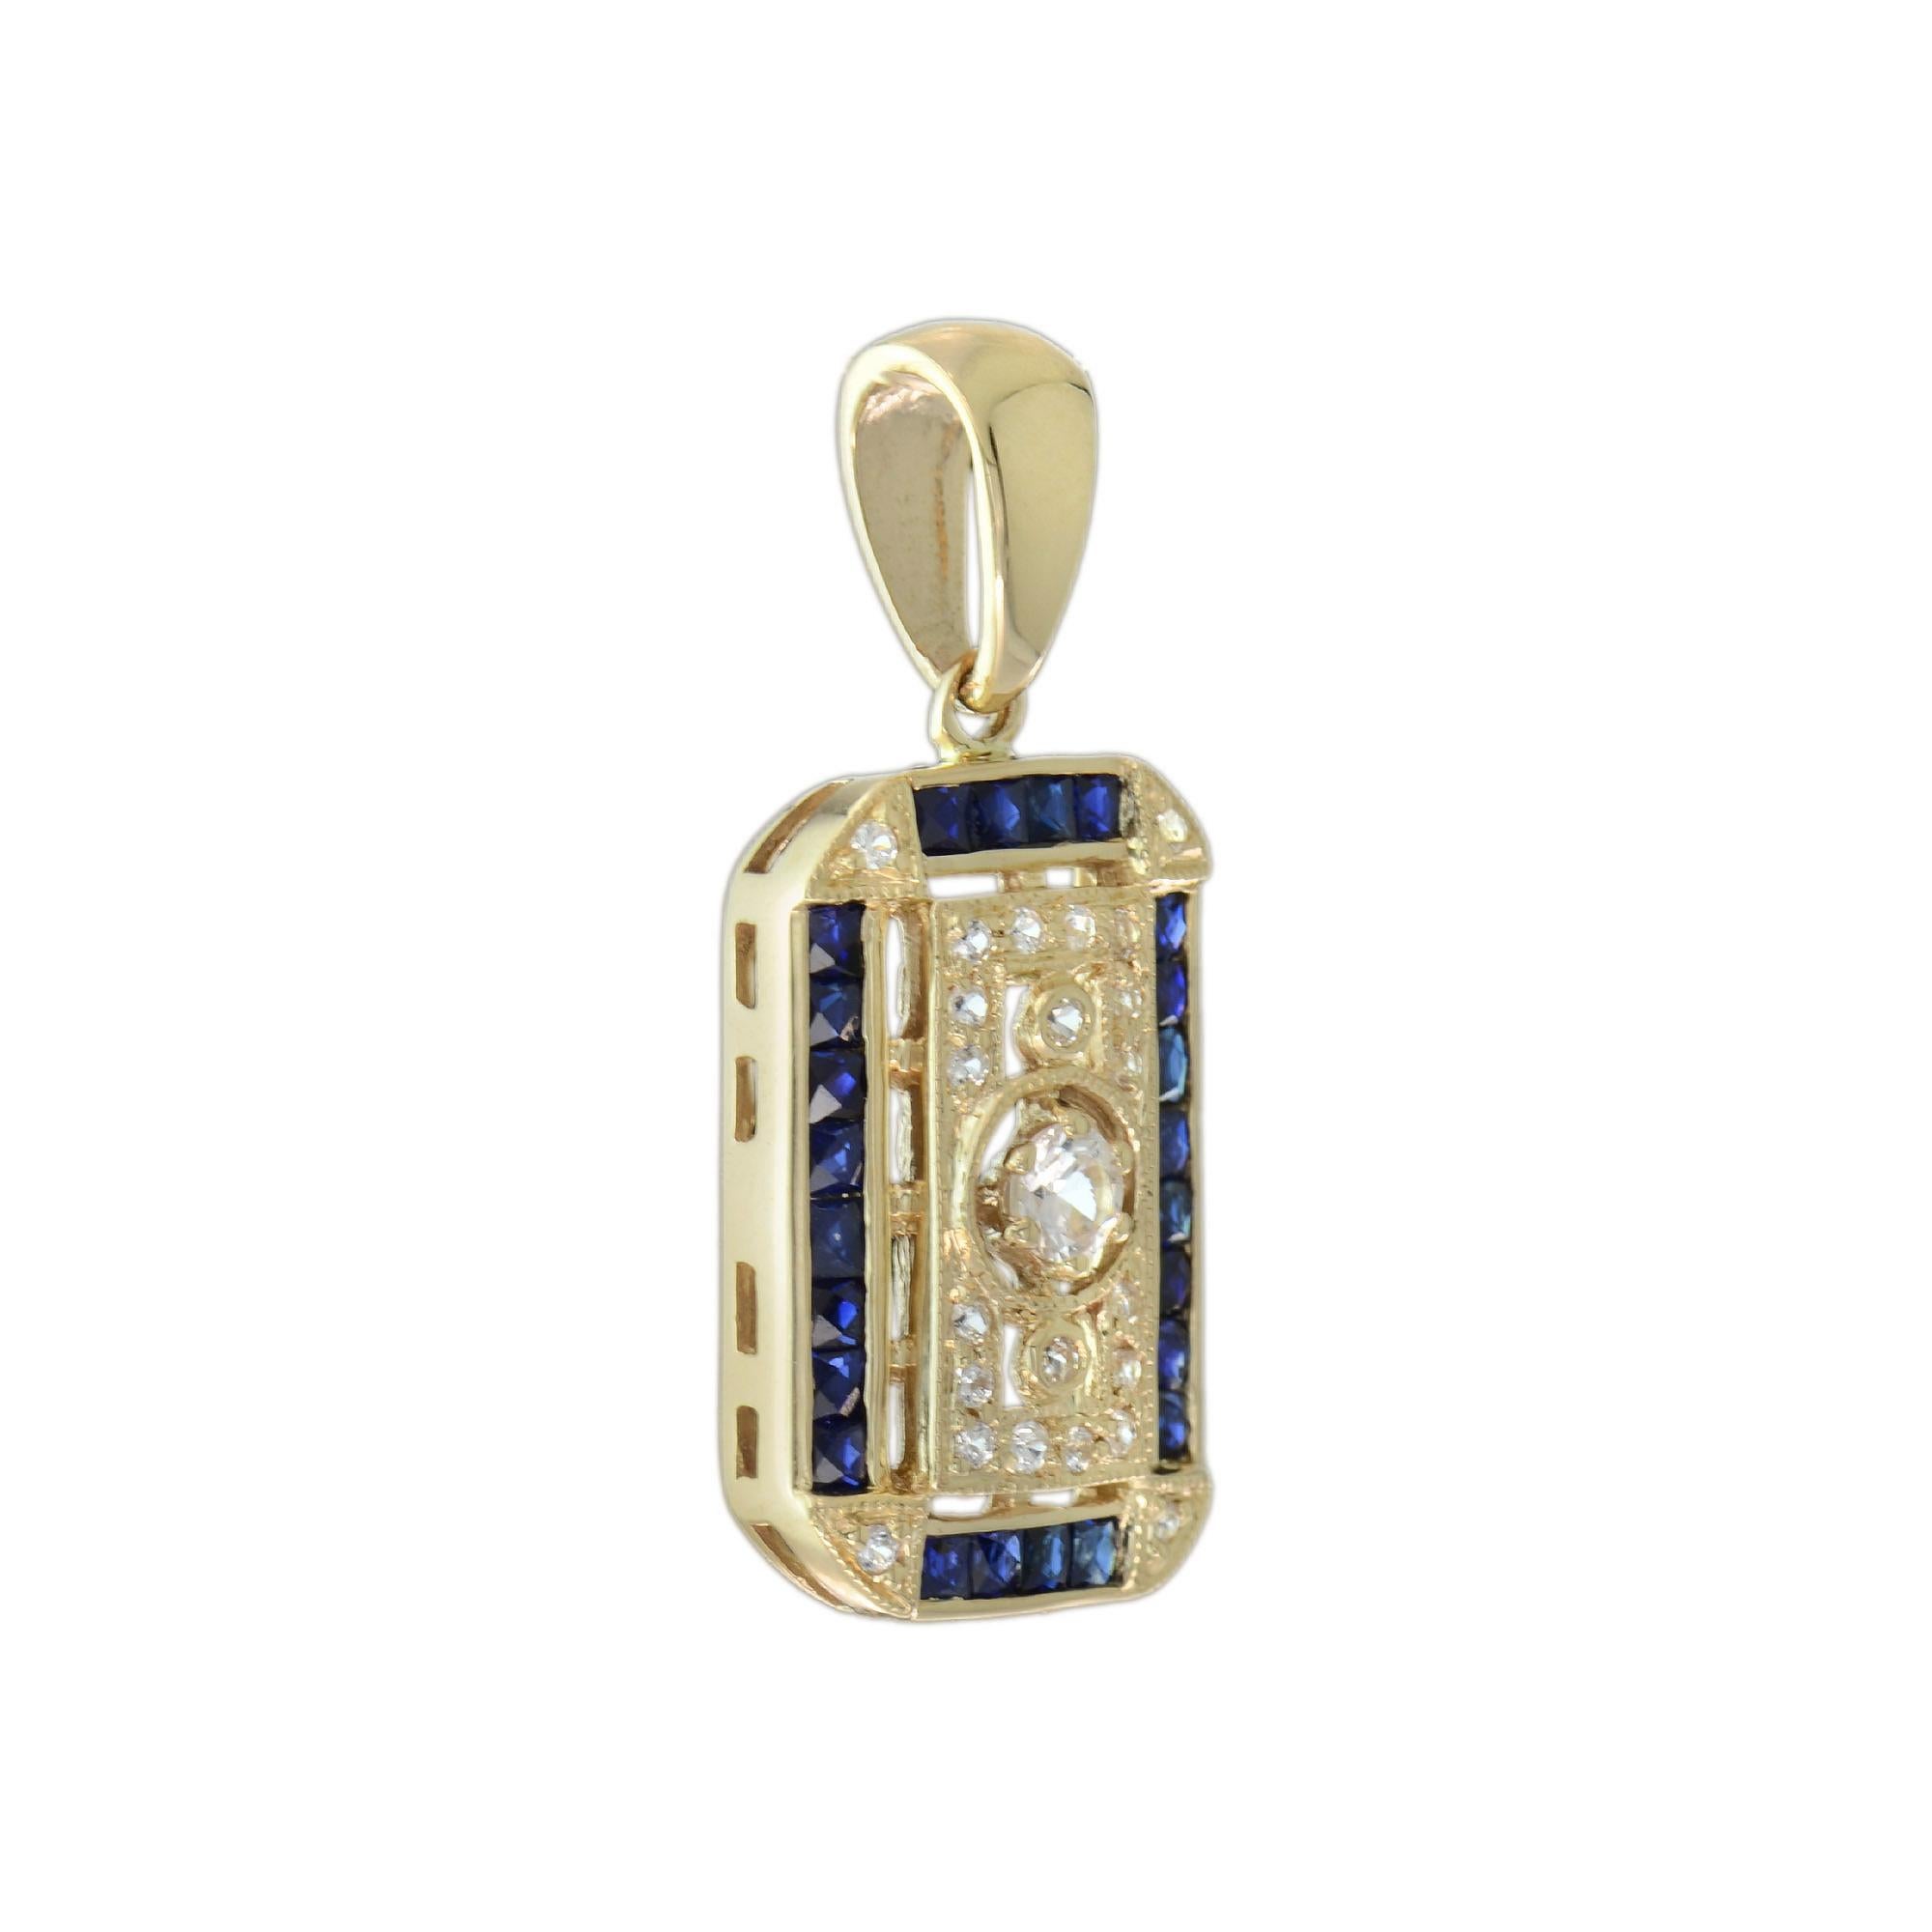 Edwardian Old Cut Diamond and Sapphire Antique Style Filigree Pendant in 14K Yellow Gold For Sale